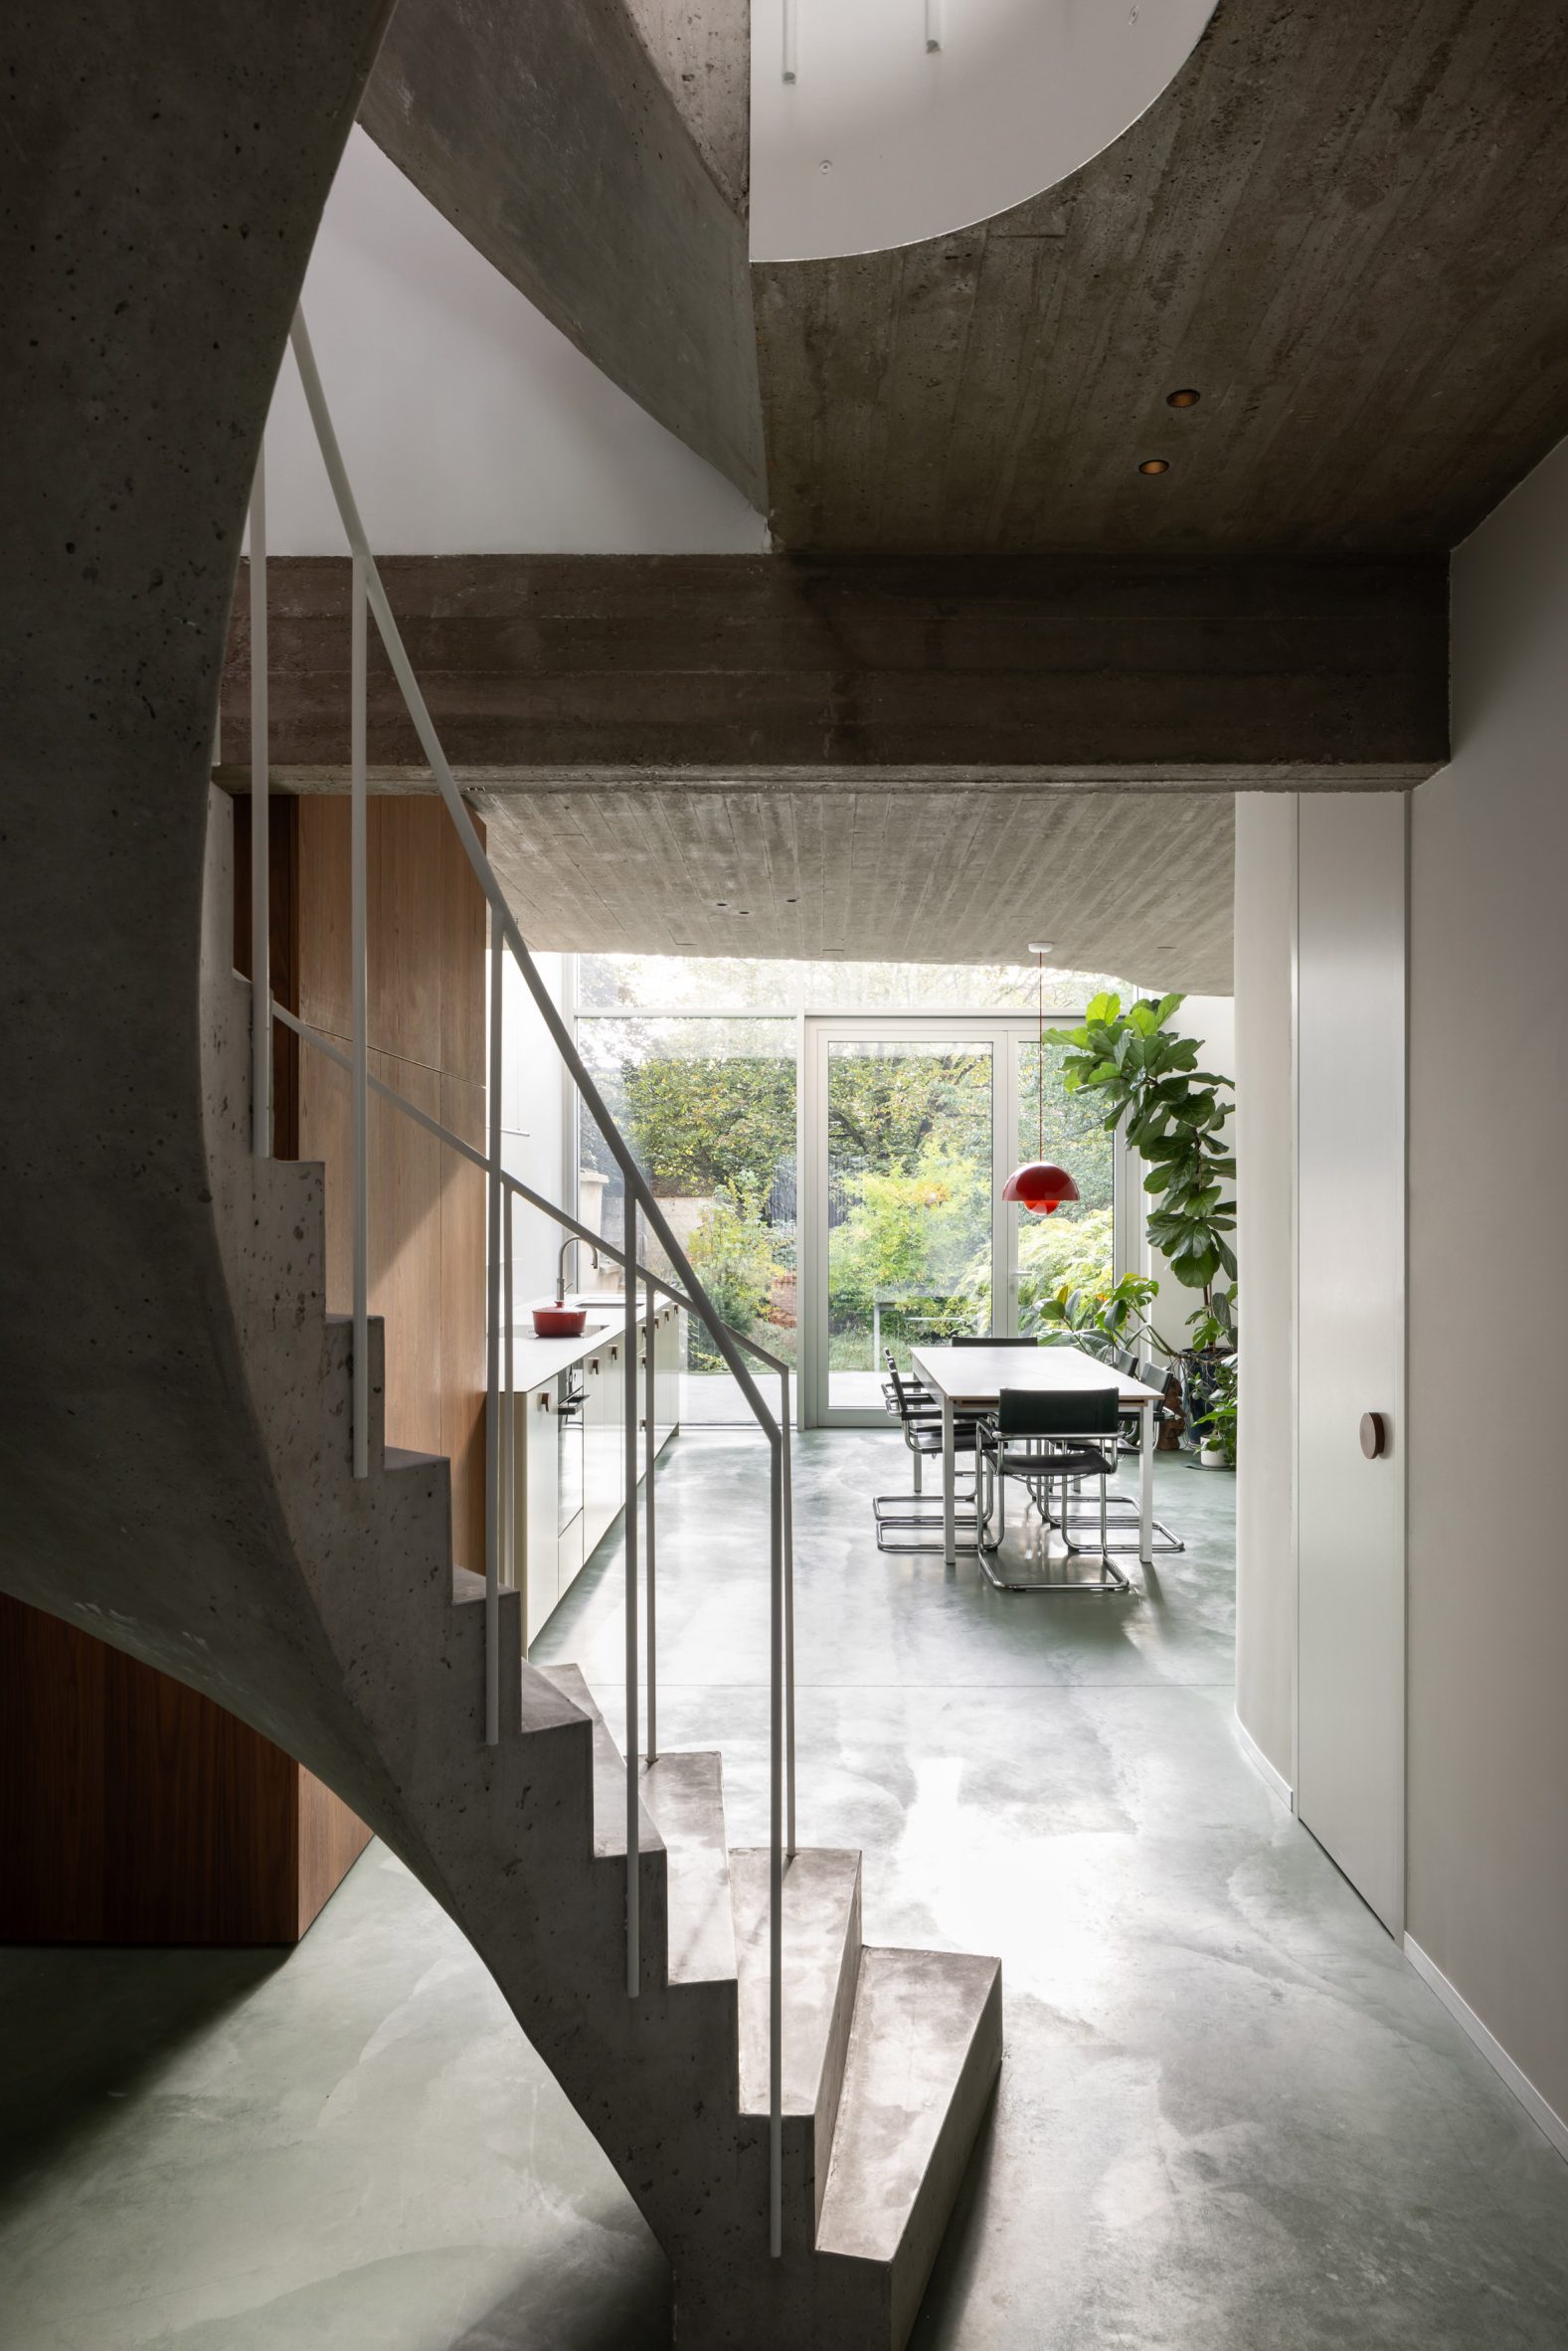 Entrance hall of Belgian home by Memo Architectuur in Belgium